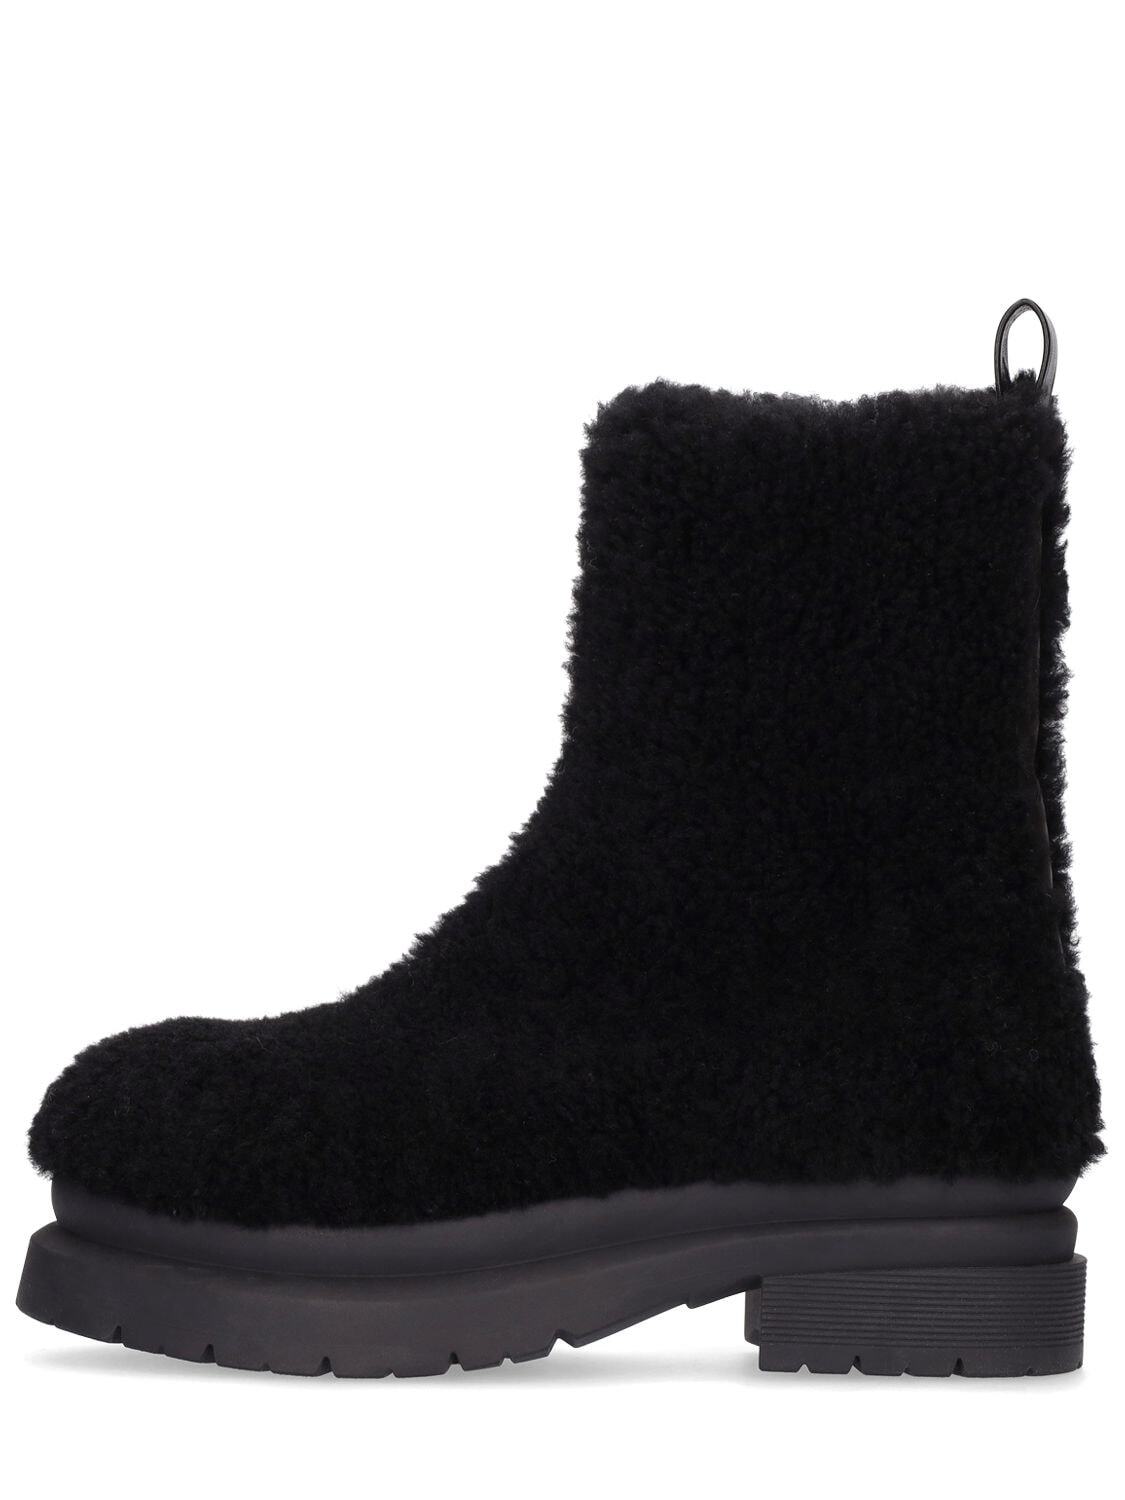 JW ANDERSON 20mm Fur Ankle Boots in black